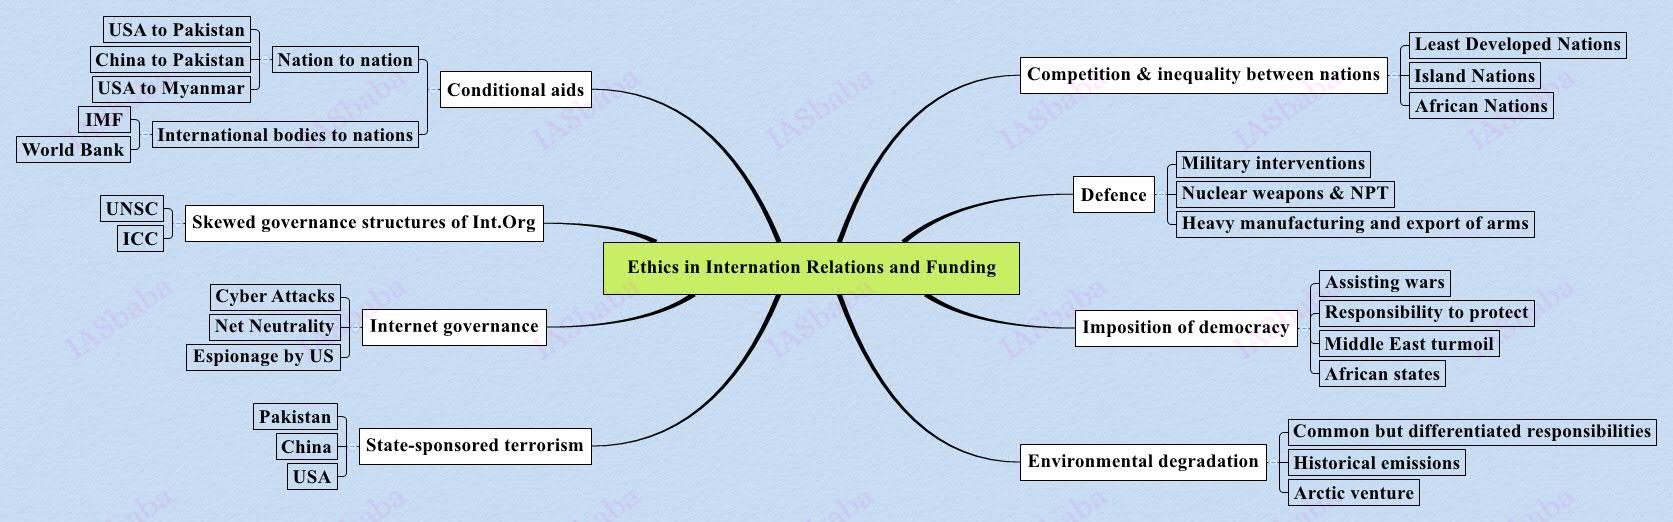 Ethics-in-Internation-Relations-and-Funding